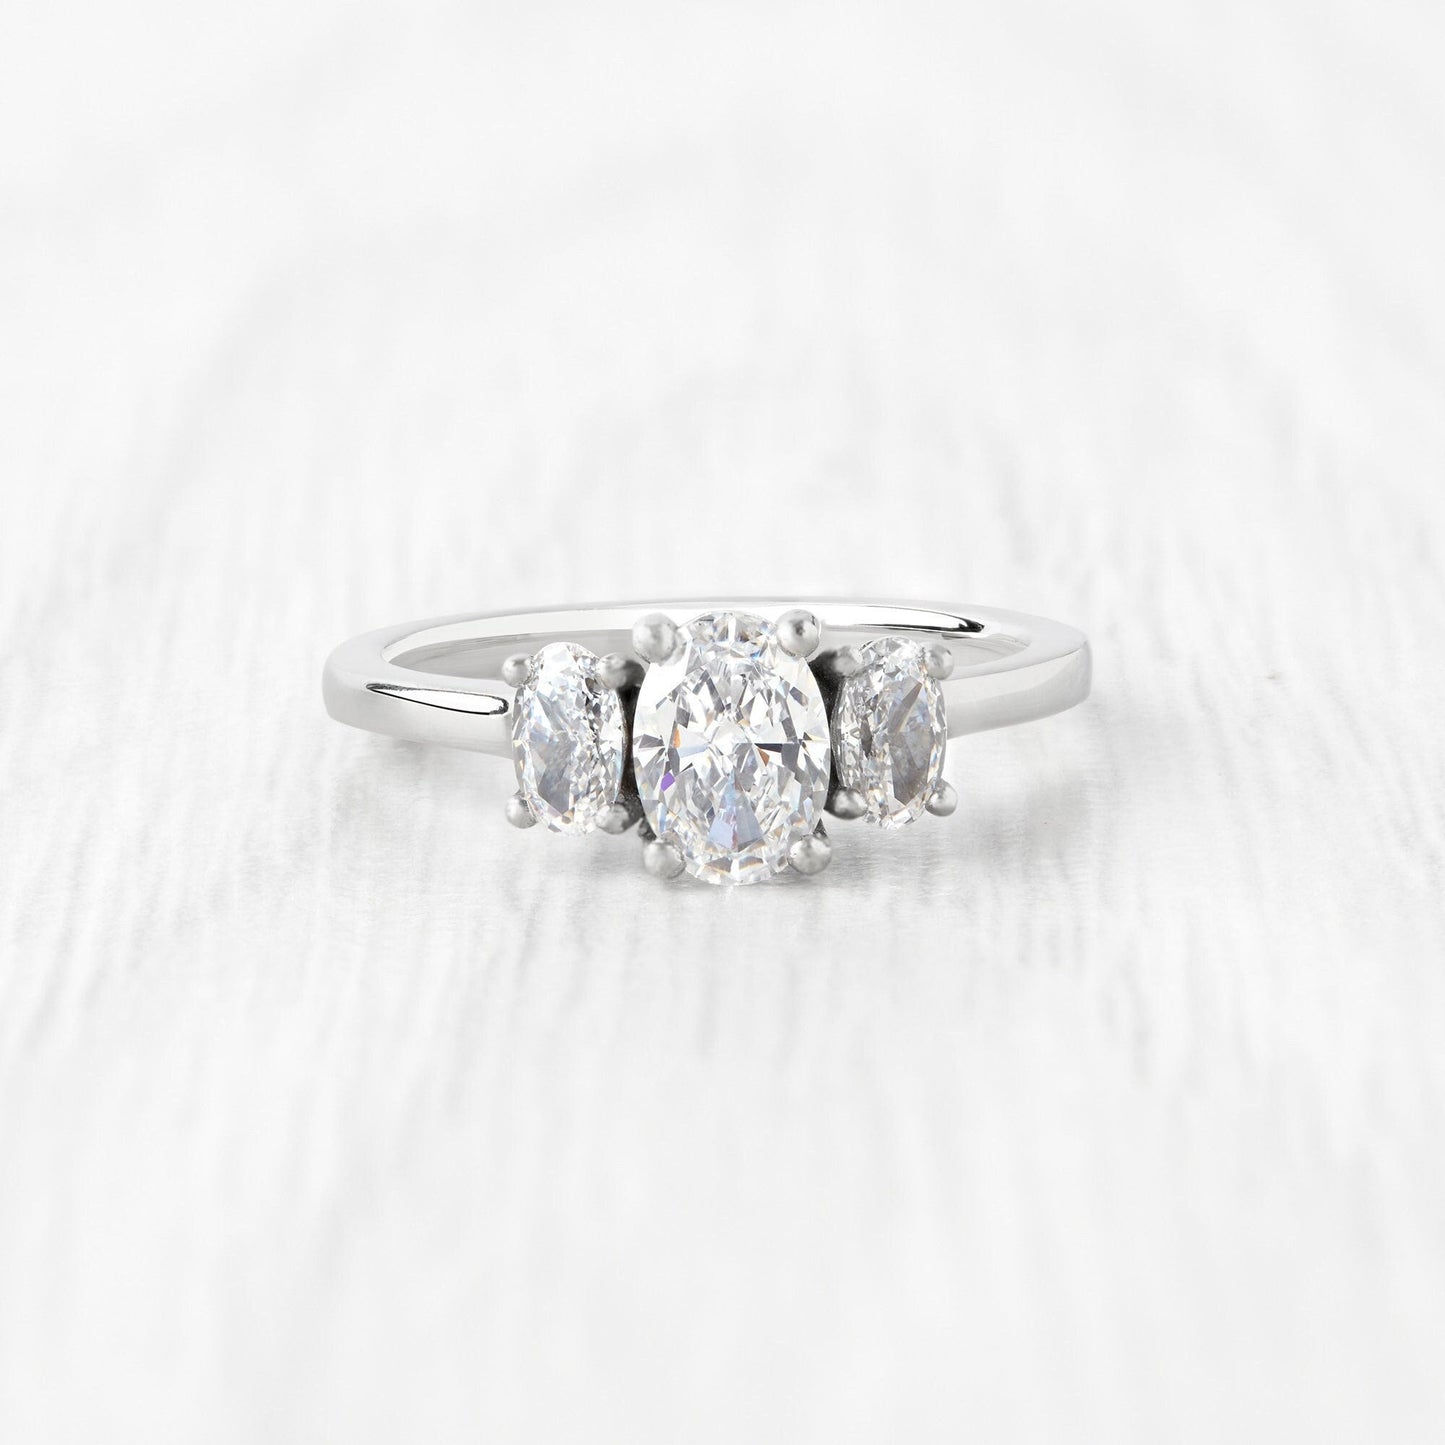 Crushed ICE CUT Genuine moissanite Oval Ice cut 3 stone Trilogy Ring in White Gold or Titanium  - engagement ring - handmade ring